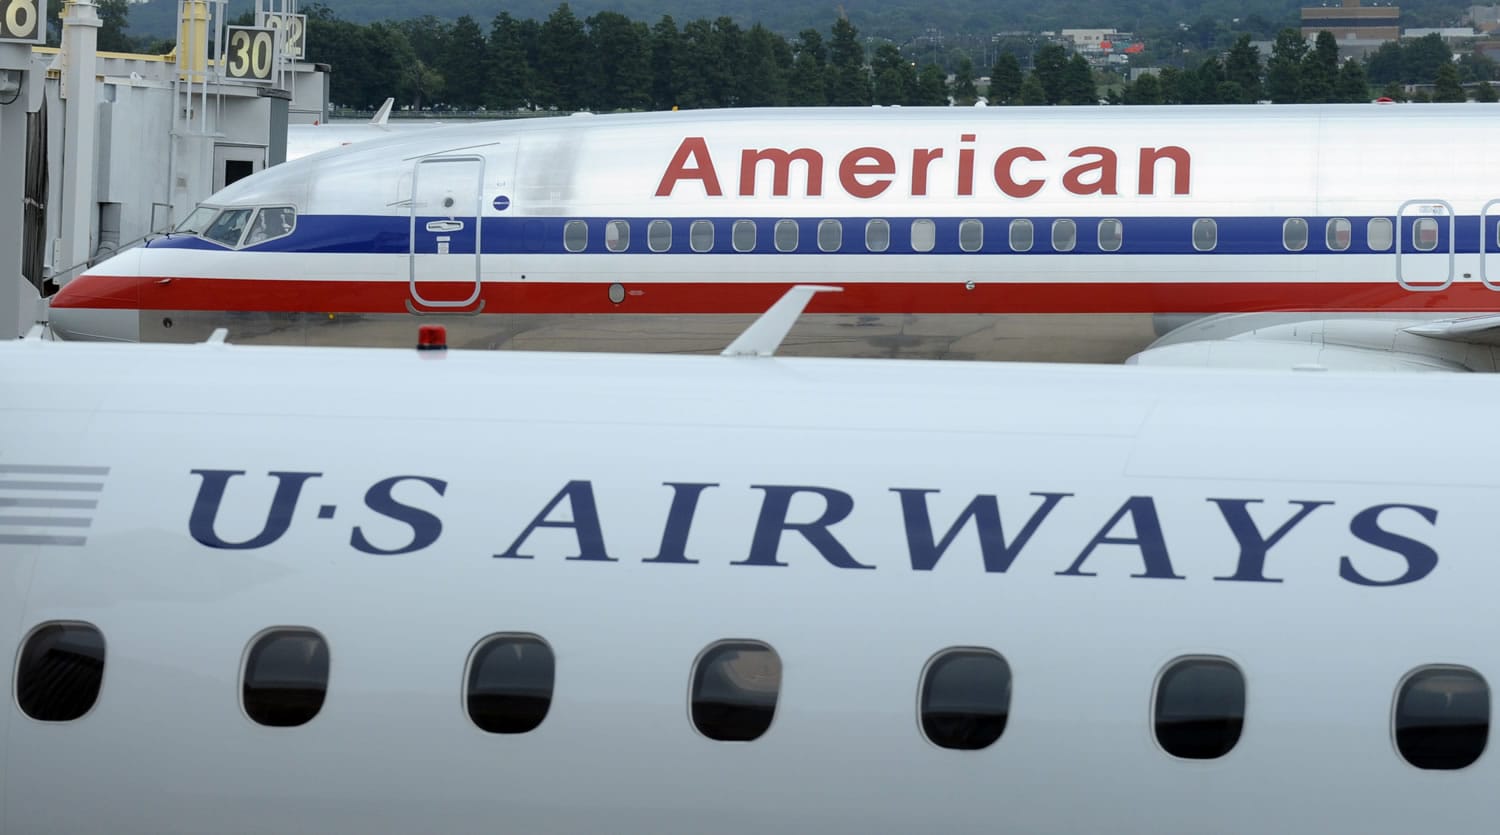 An American Airlines plane and a US Airways plane are parked at Washington's Ronald Reagan National Airport.